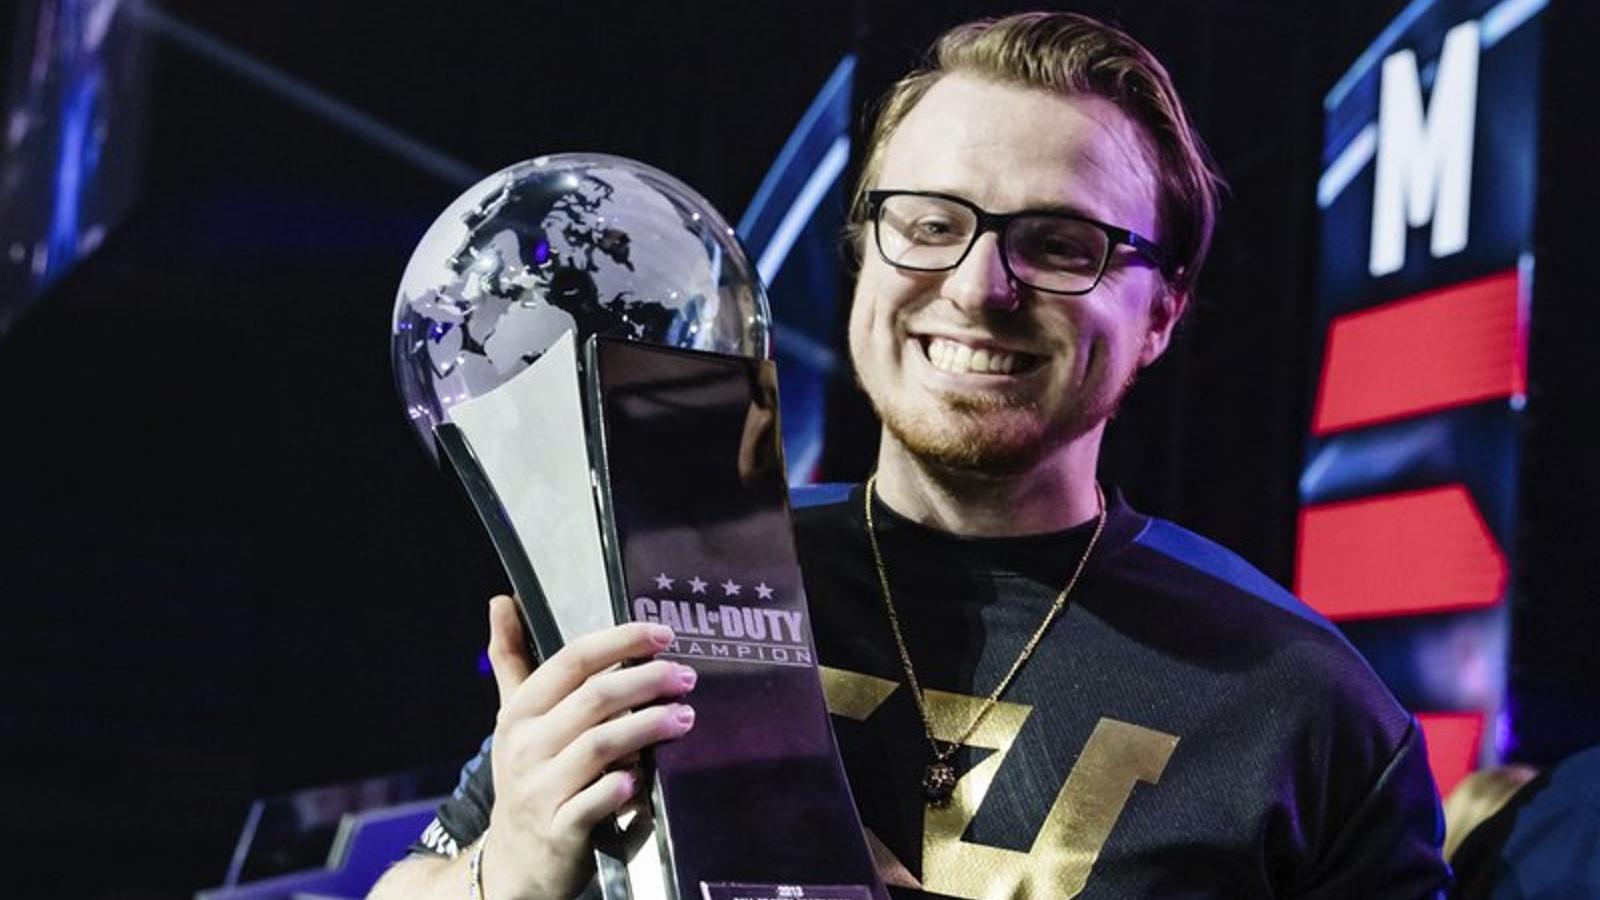 Burns holding CWL Champs trophy after eUnited Champs win in 2019